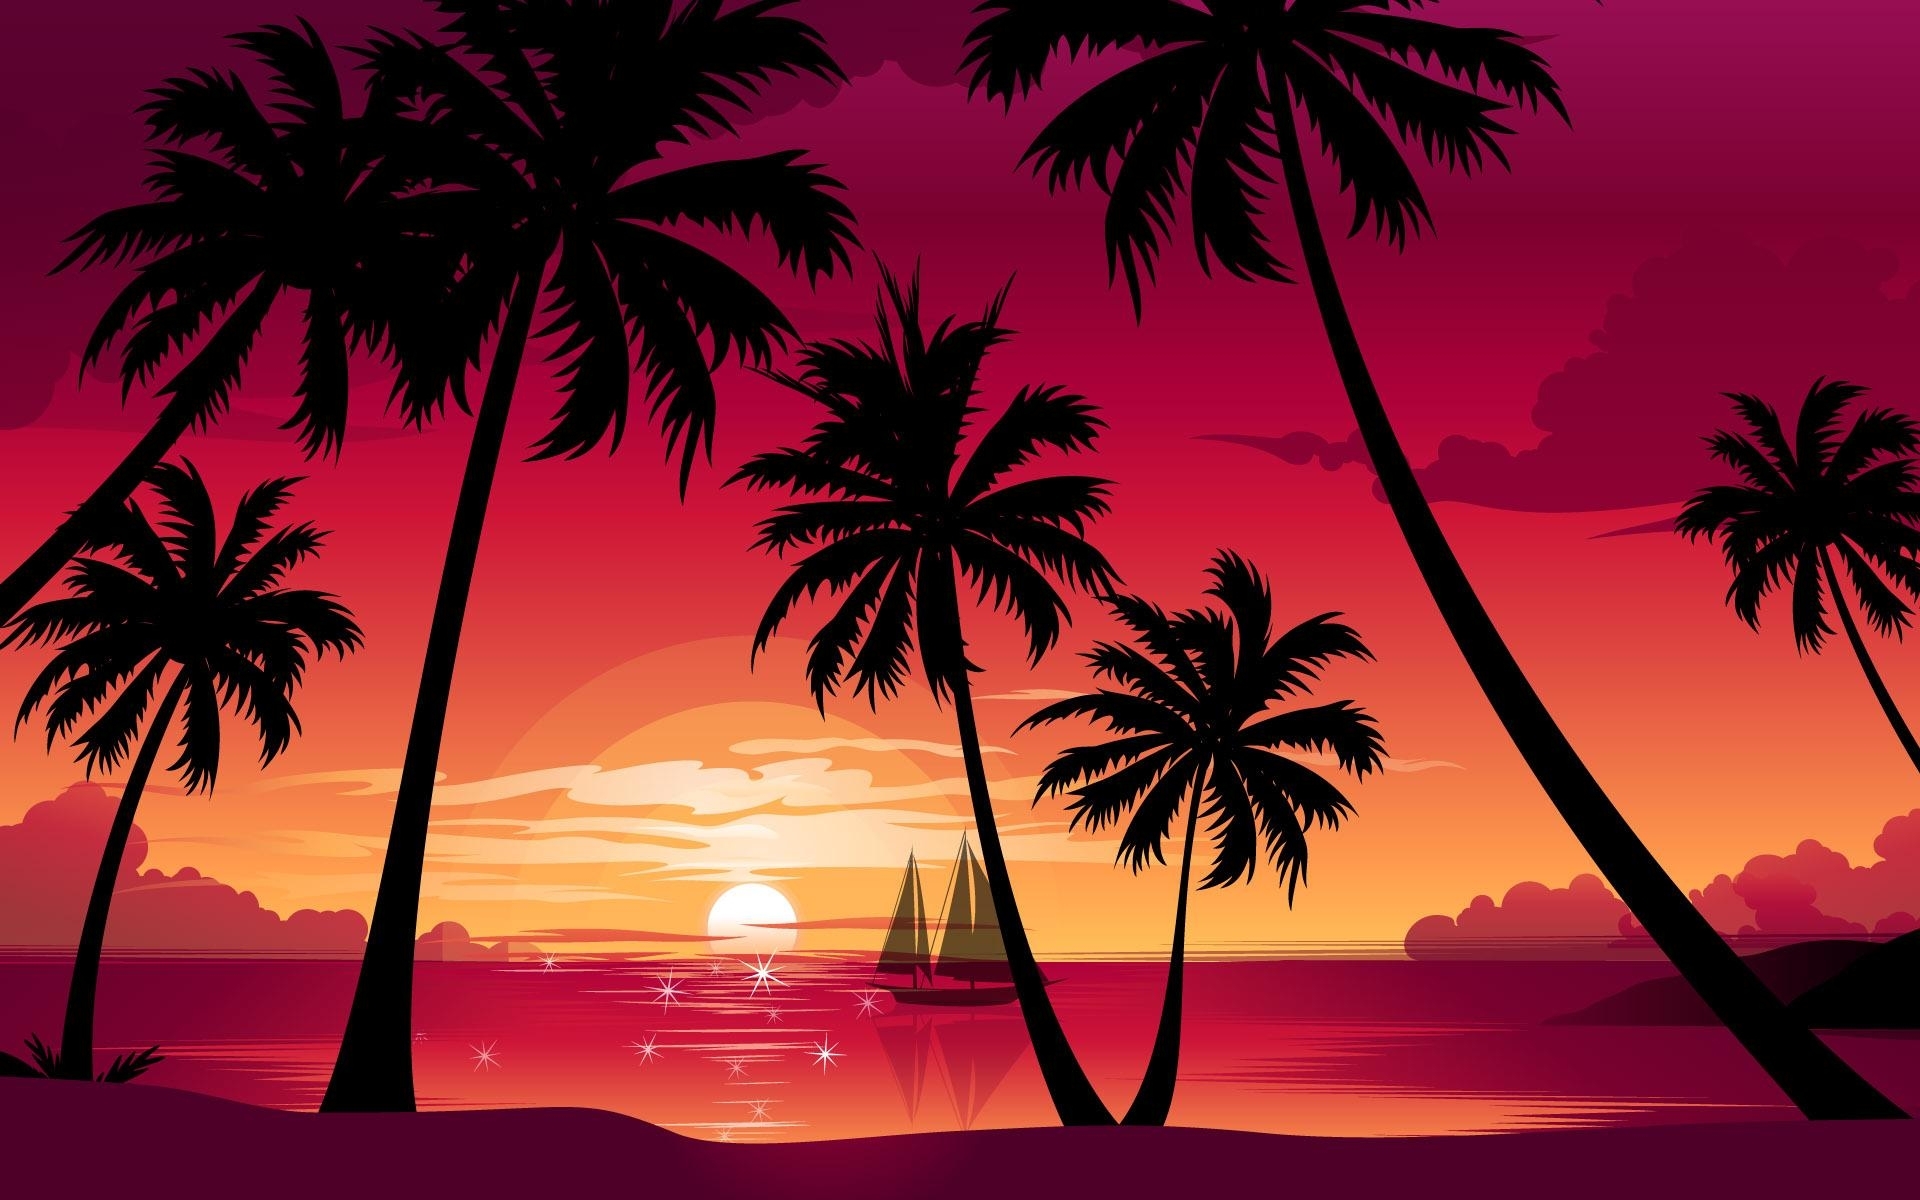 pictures, palms, sunset, red, landscape High Definition image